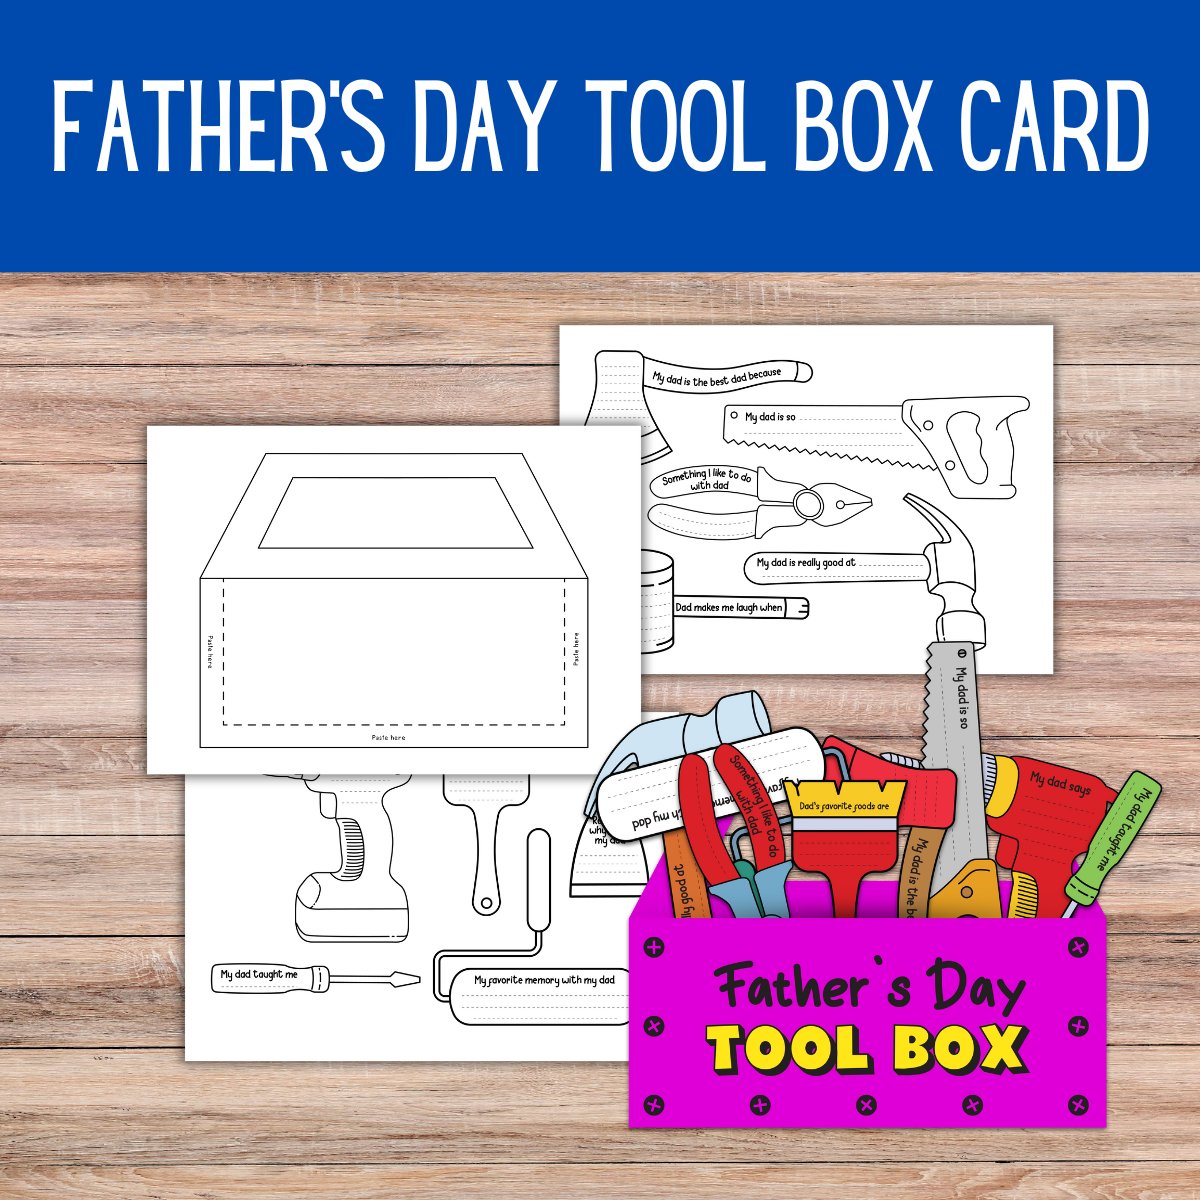 Father's Day Tool Box Card Craftivity